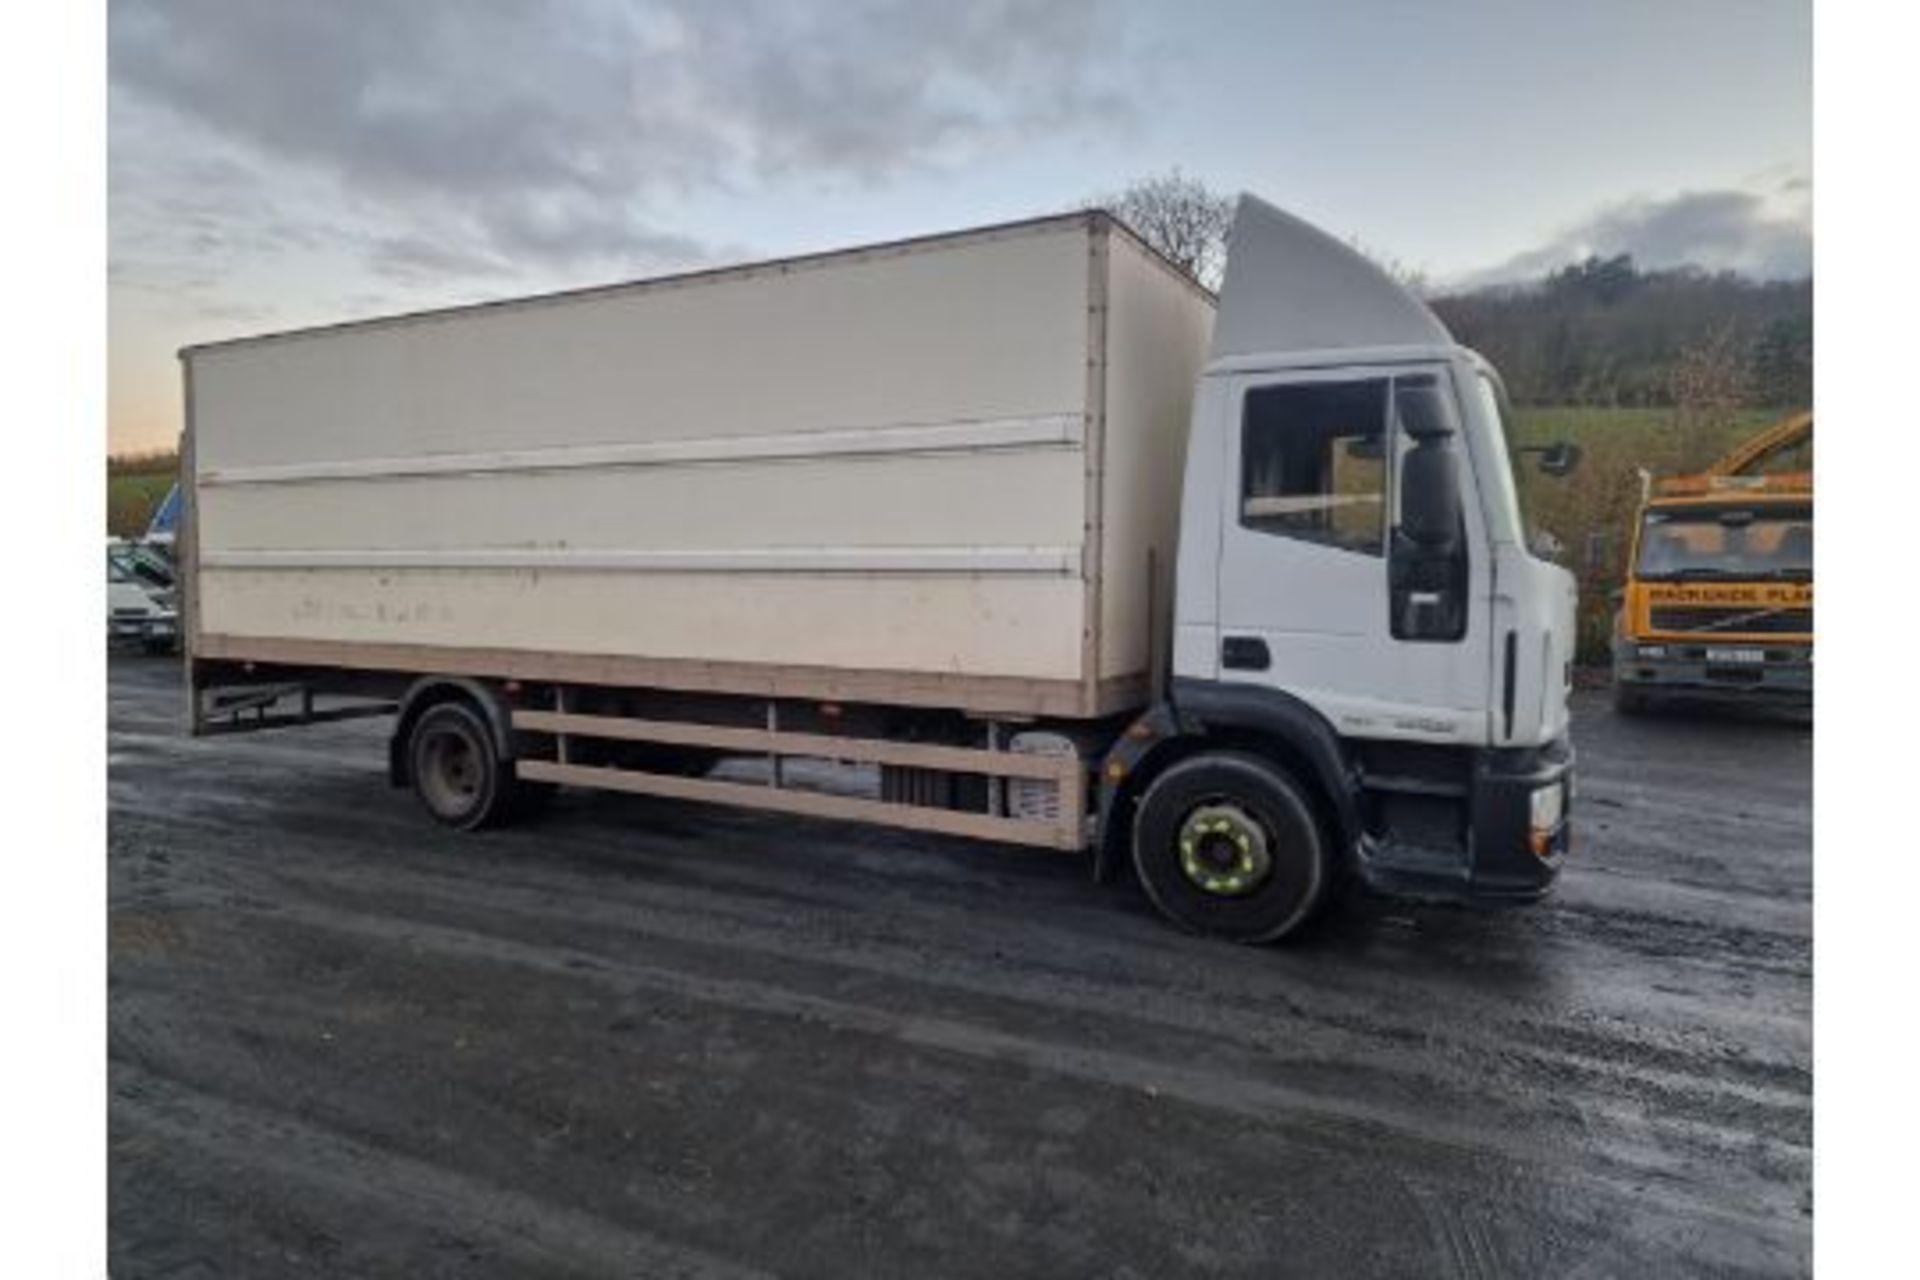 10/60 IVECO EUROCARGO (MY 2008) - 5880cc 2dr Lorry (White) - Image 2 of 16